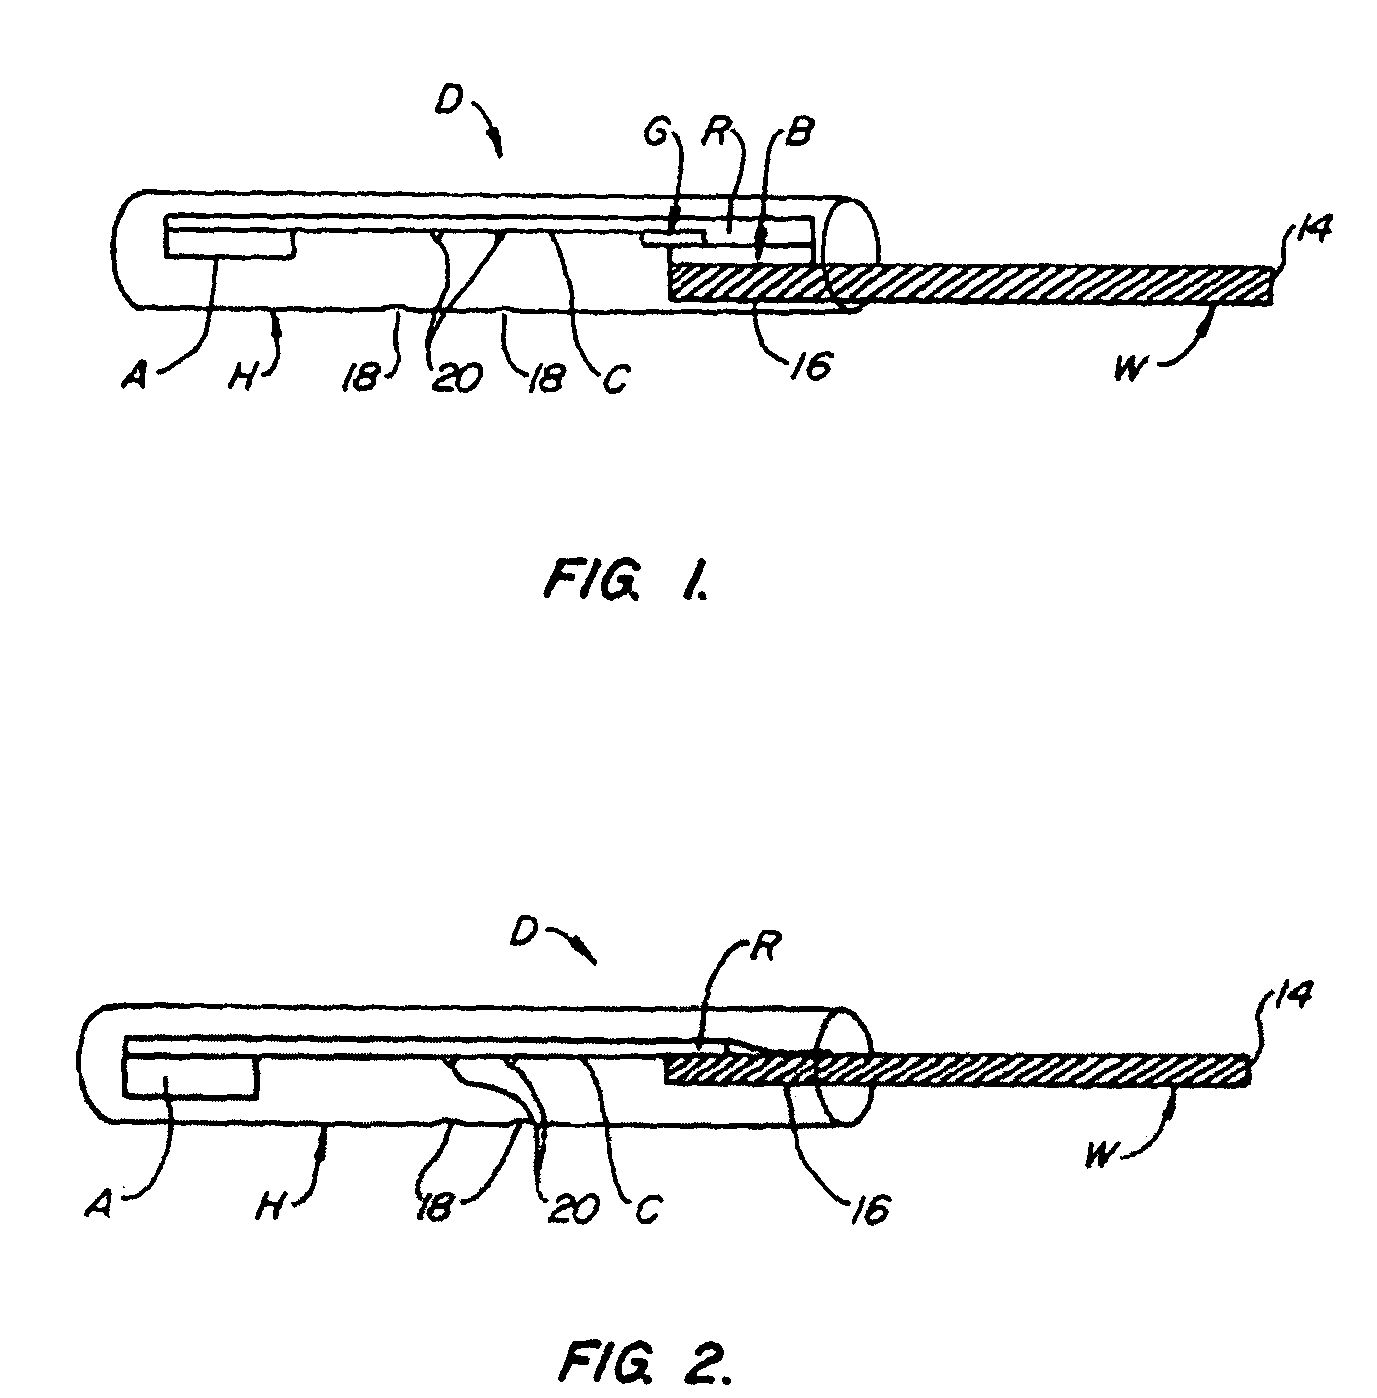 Device for collection and assay of oral fluids